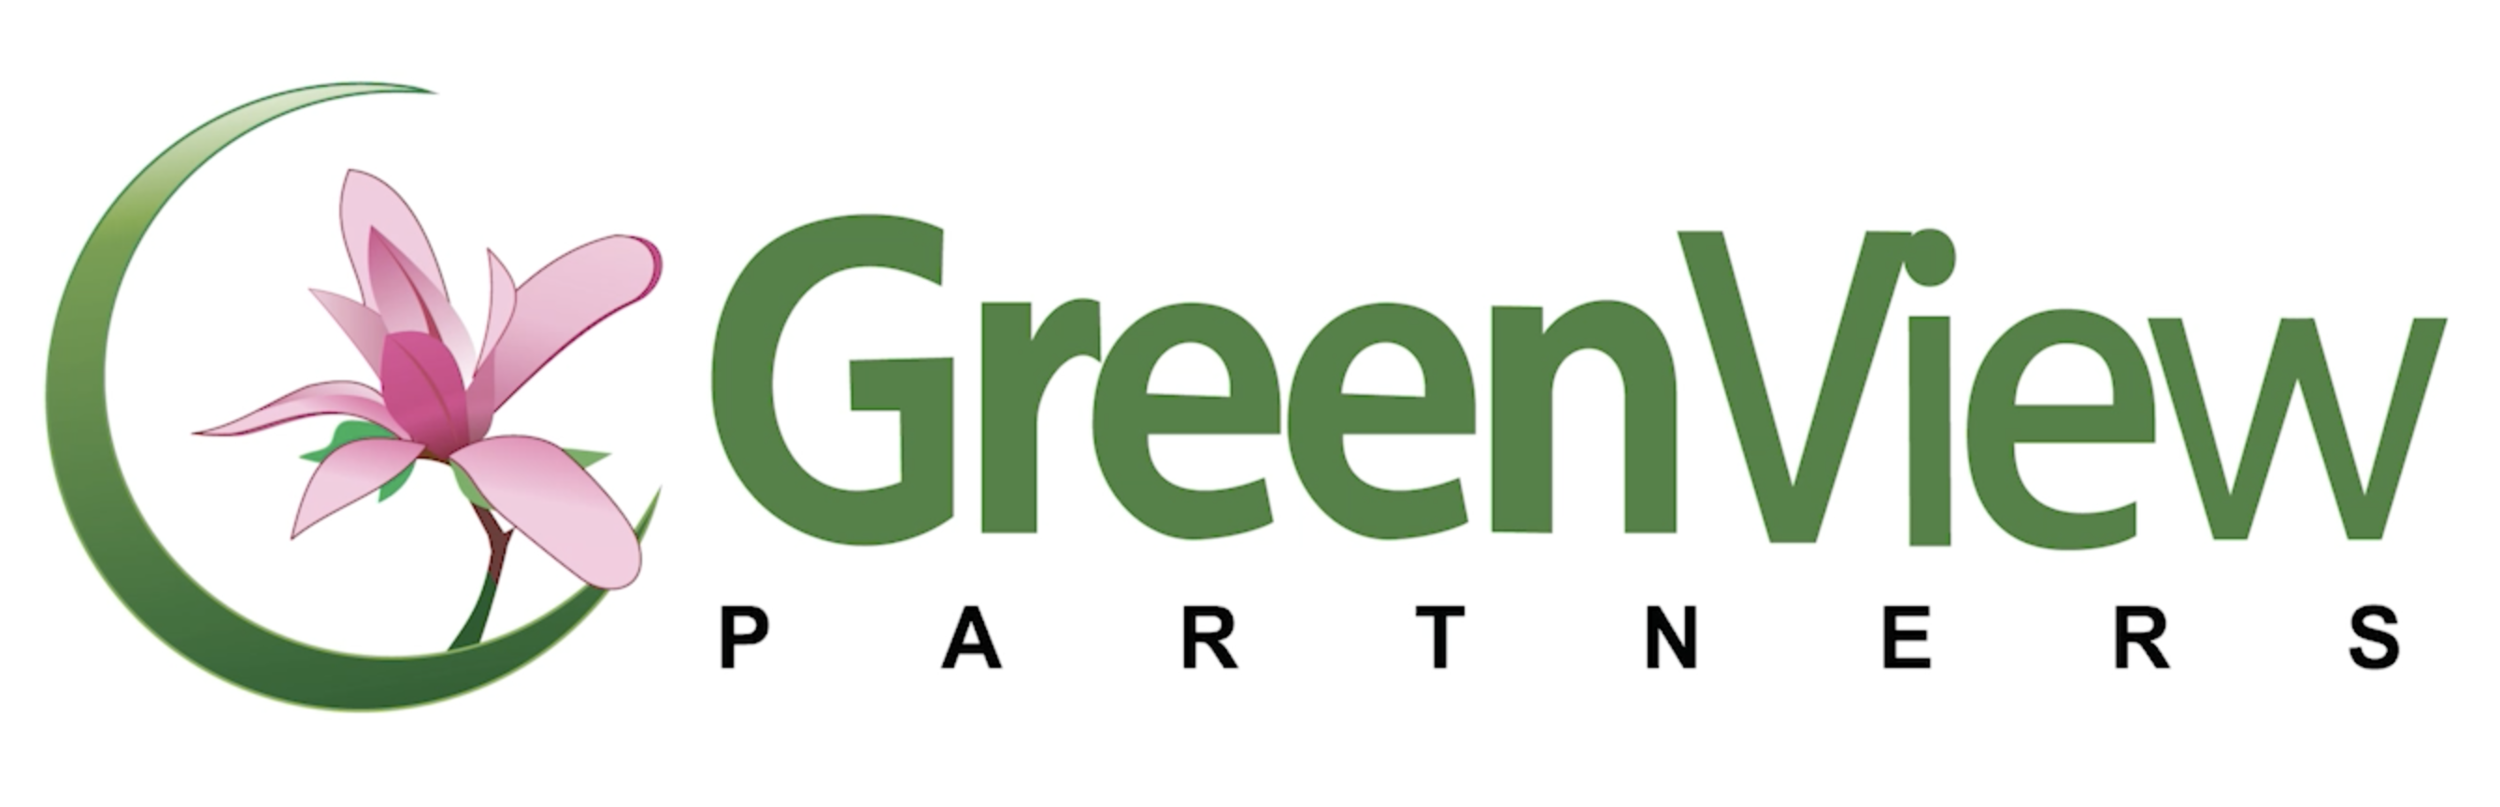 GreenView Partners logo.png